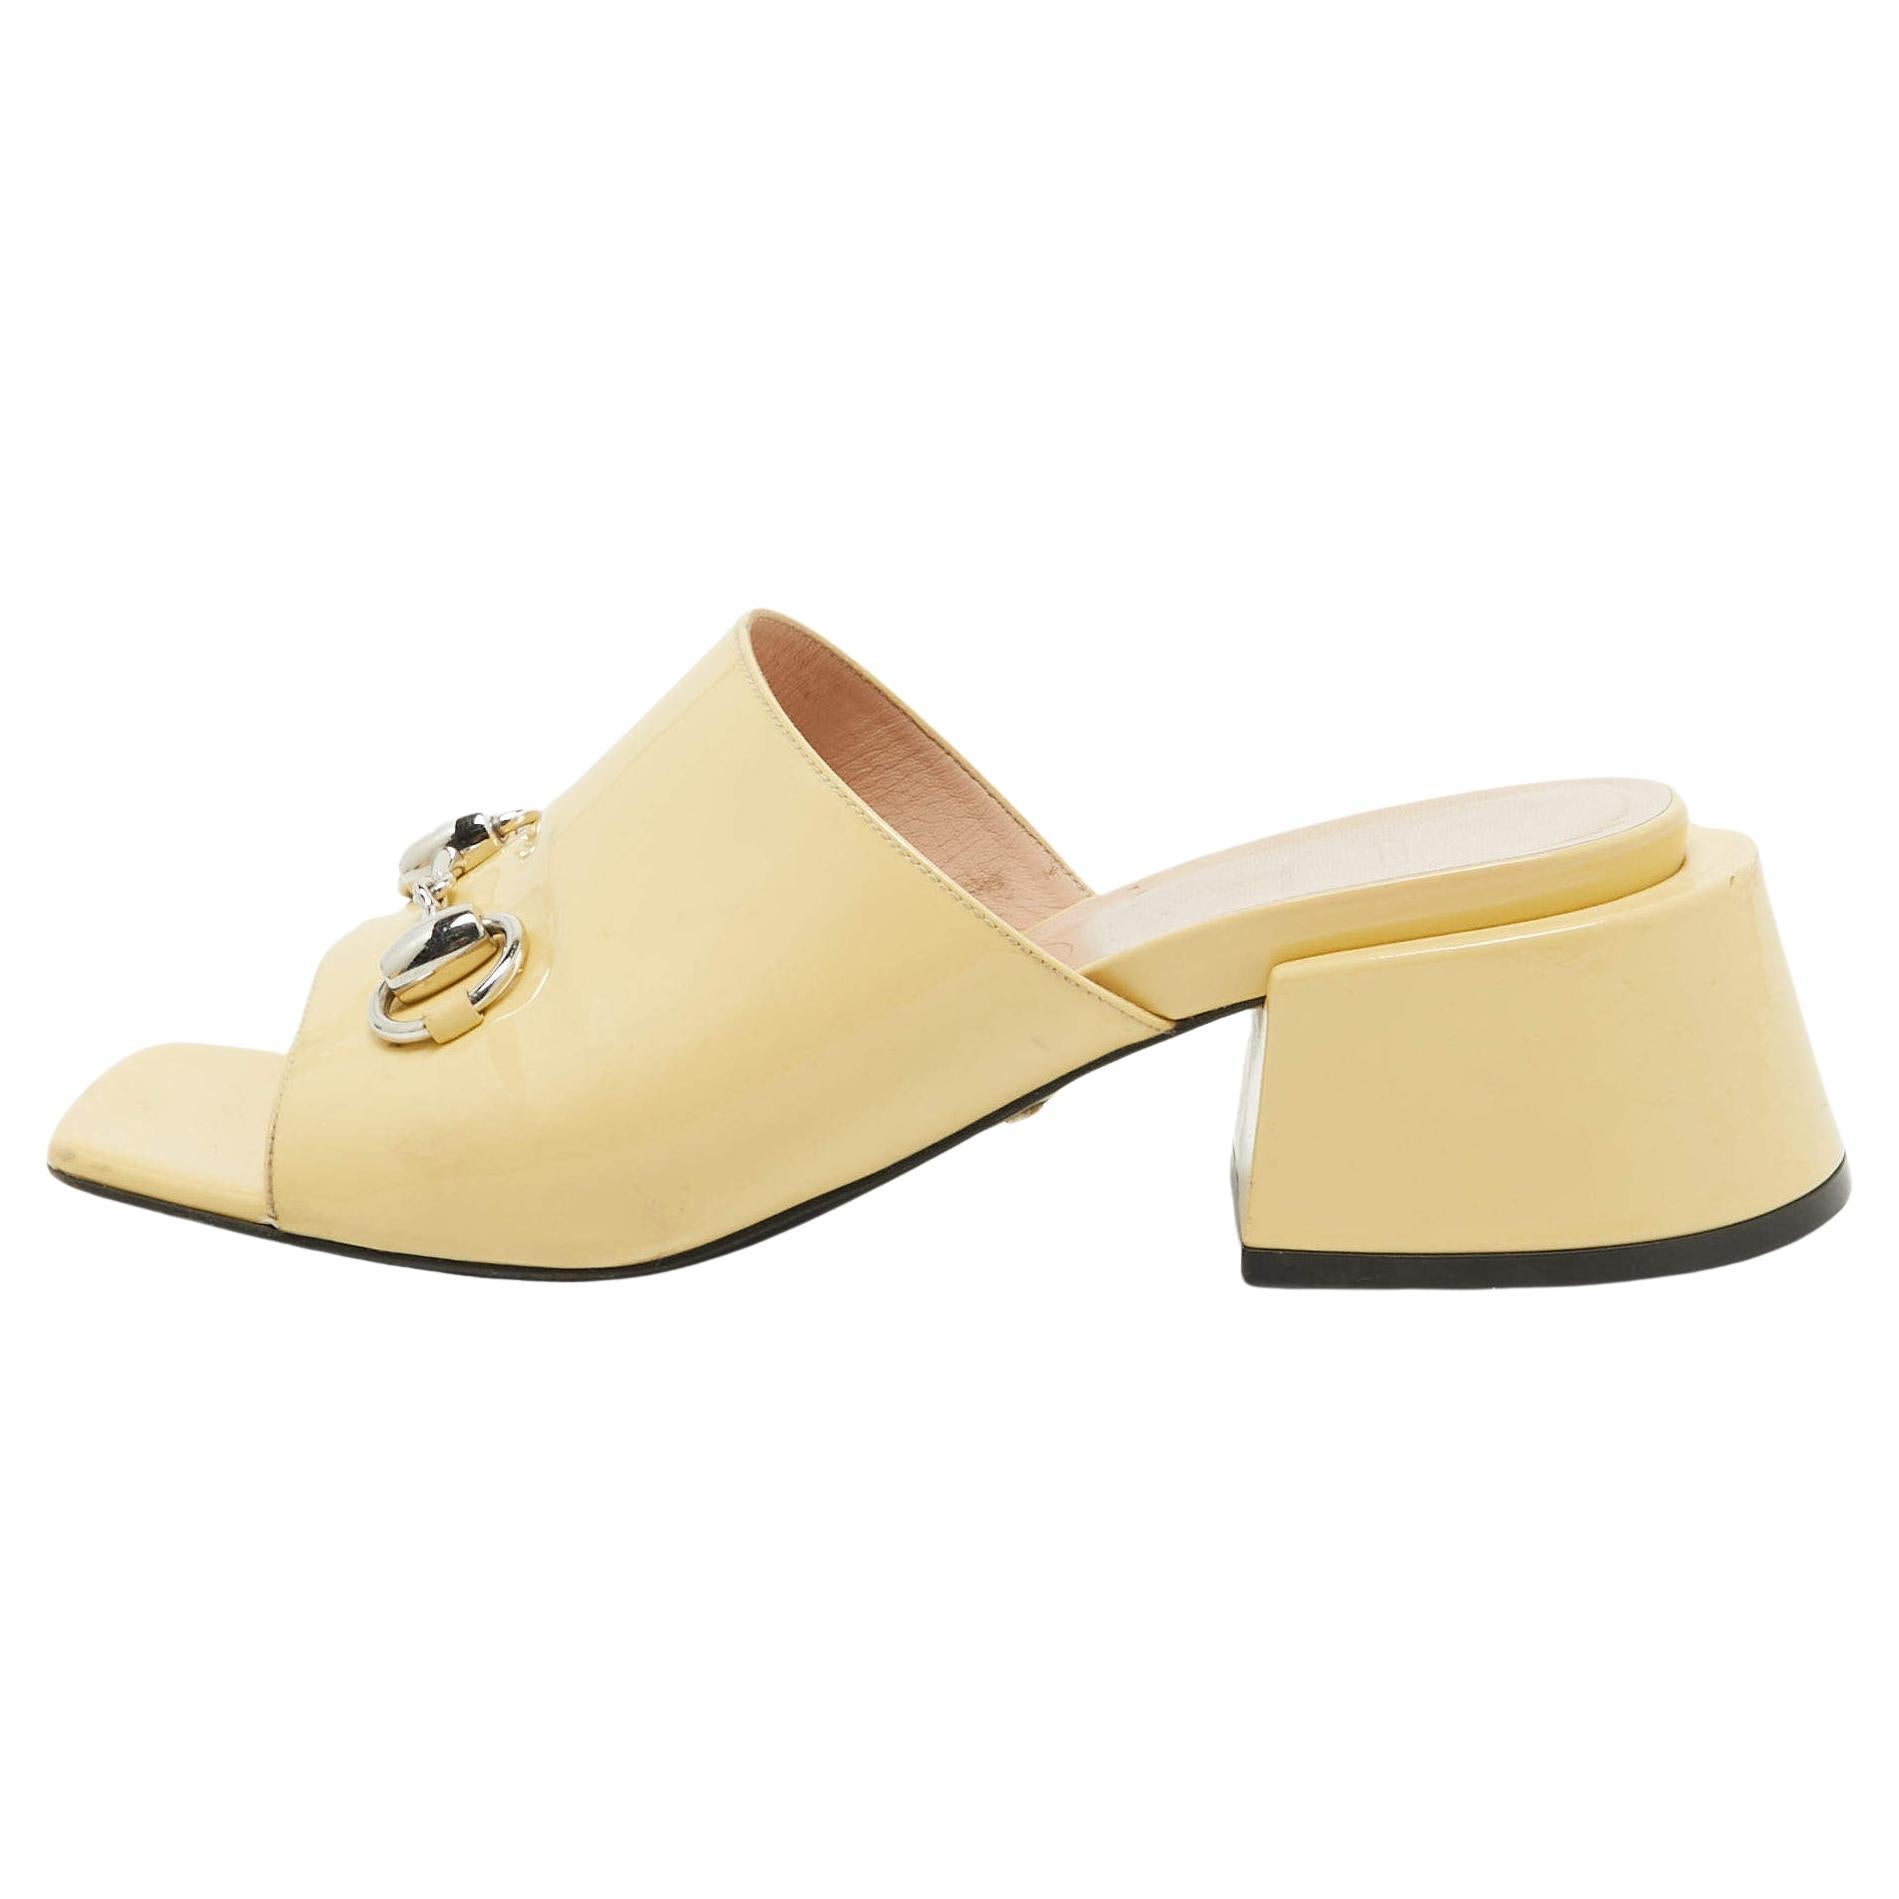 Gucci Yellow Patent Leather Lexi Slide Sandals Size 36 For Sale